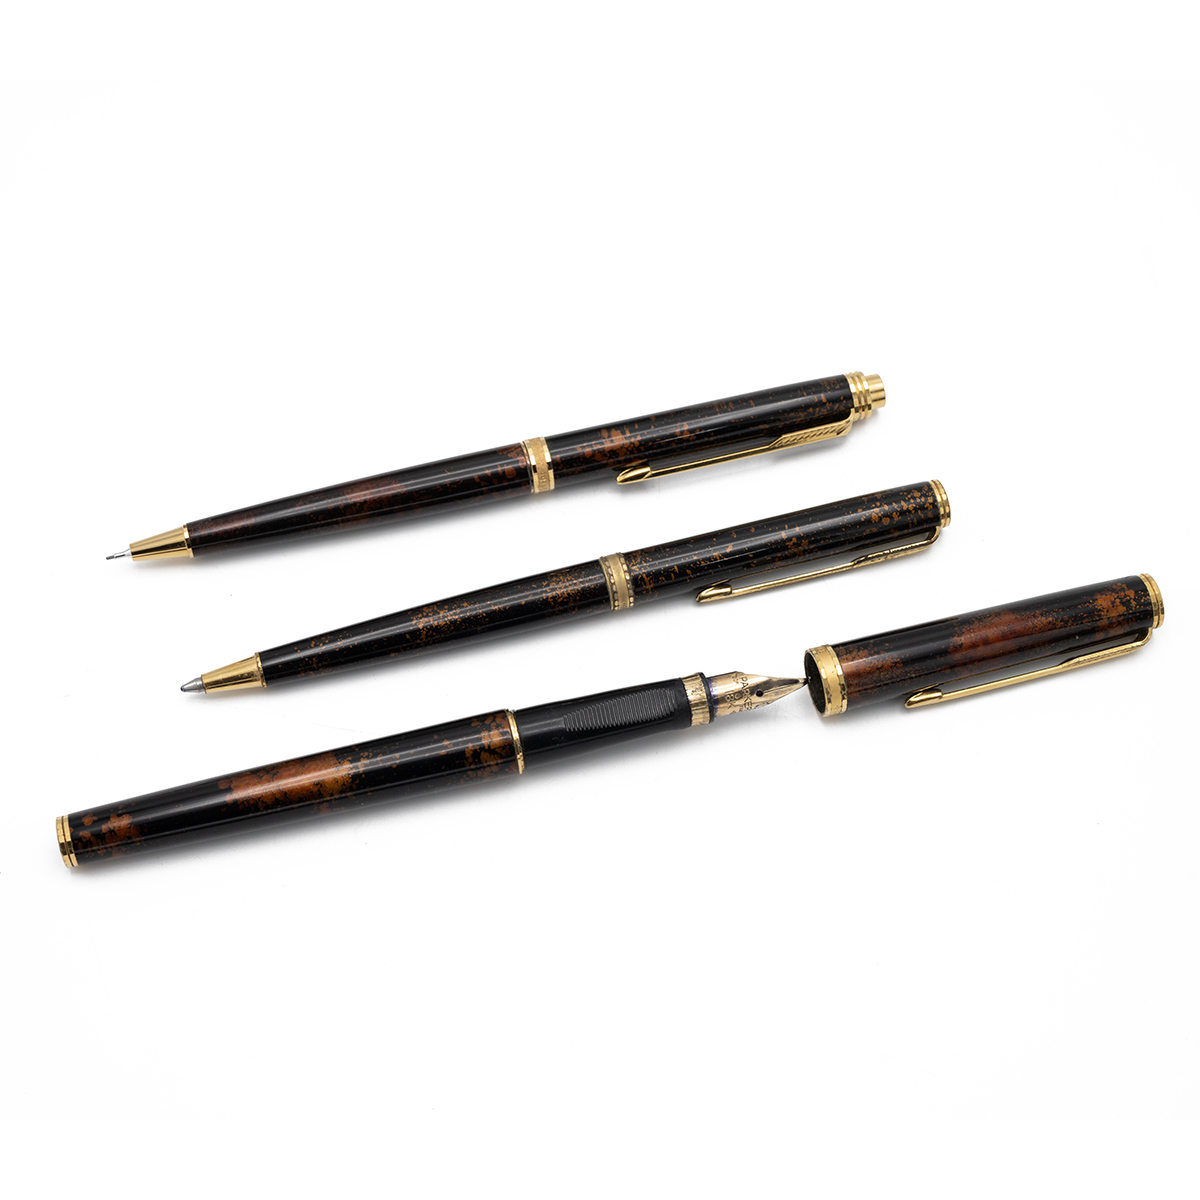 Parker "Premier Collection" Lacque de Chine three piece writing set comprising fountain pen with ... - Image 2 of 4